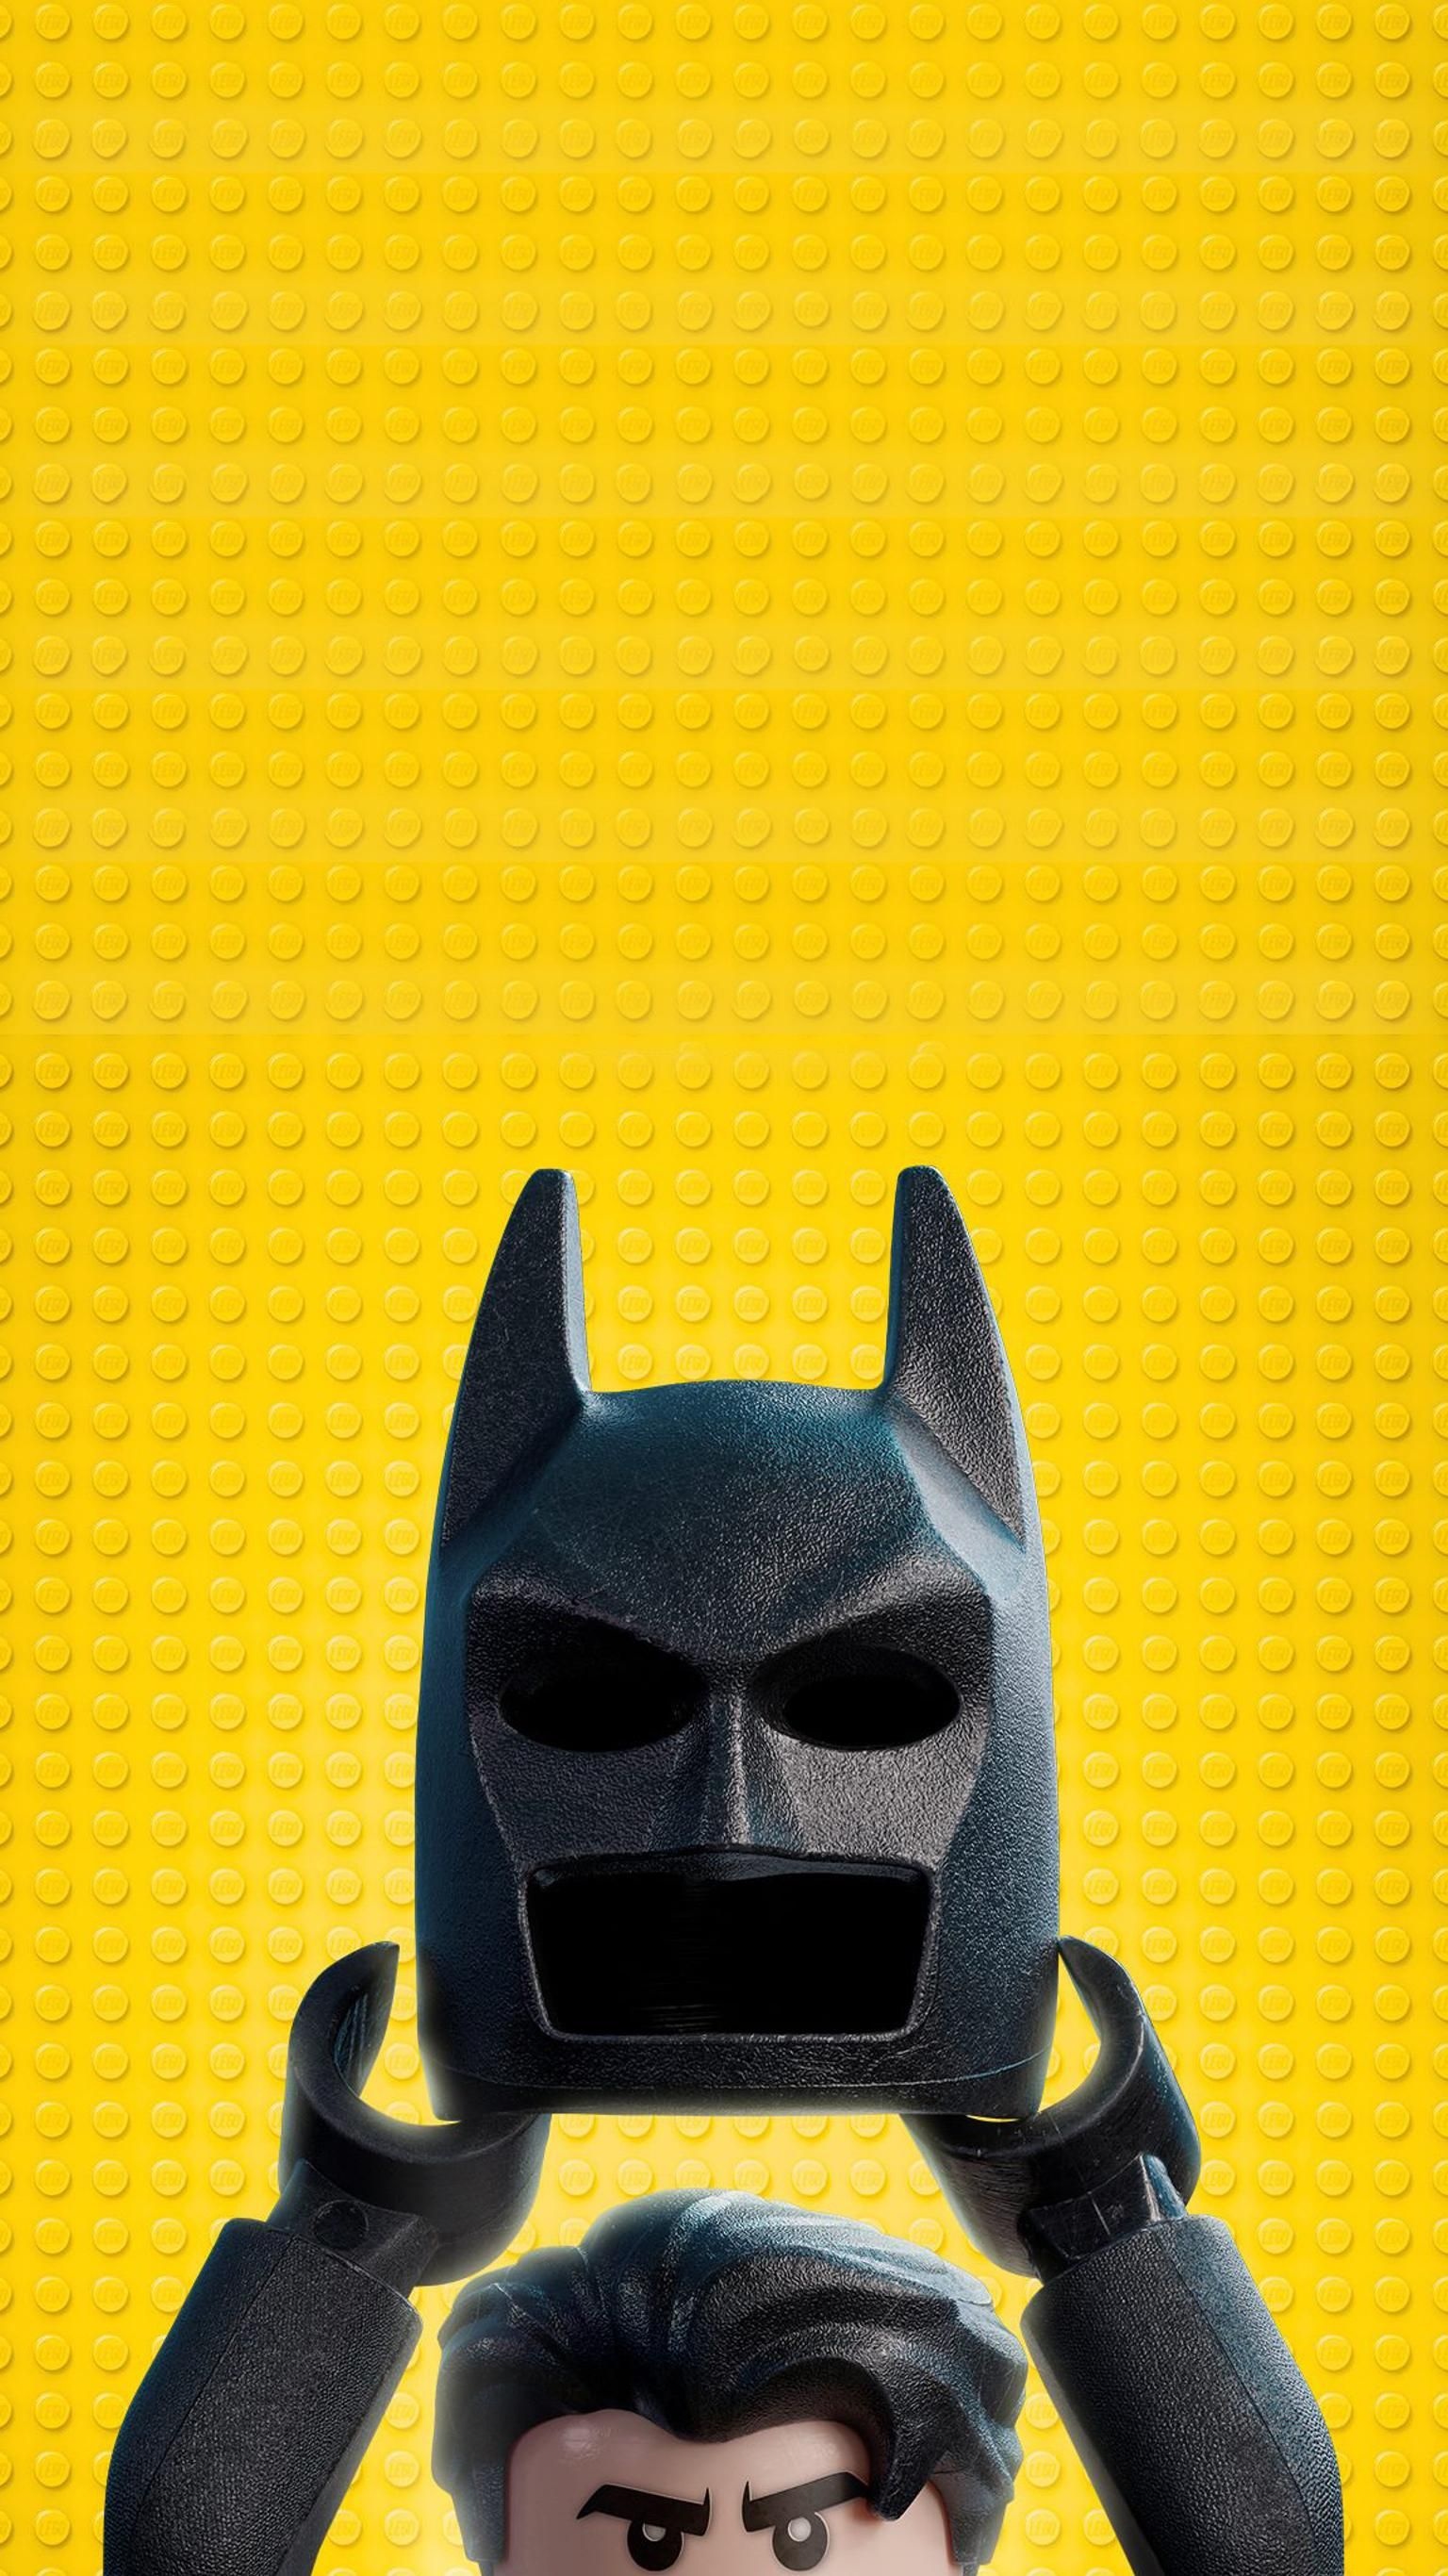 Lego Batman Movie phone wallpaper, HD quality, MovieMania, Perfect for mobile devices, 1540x2740 HD Handy